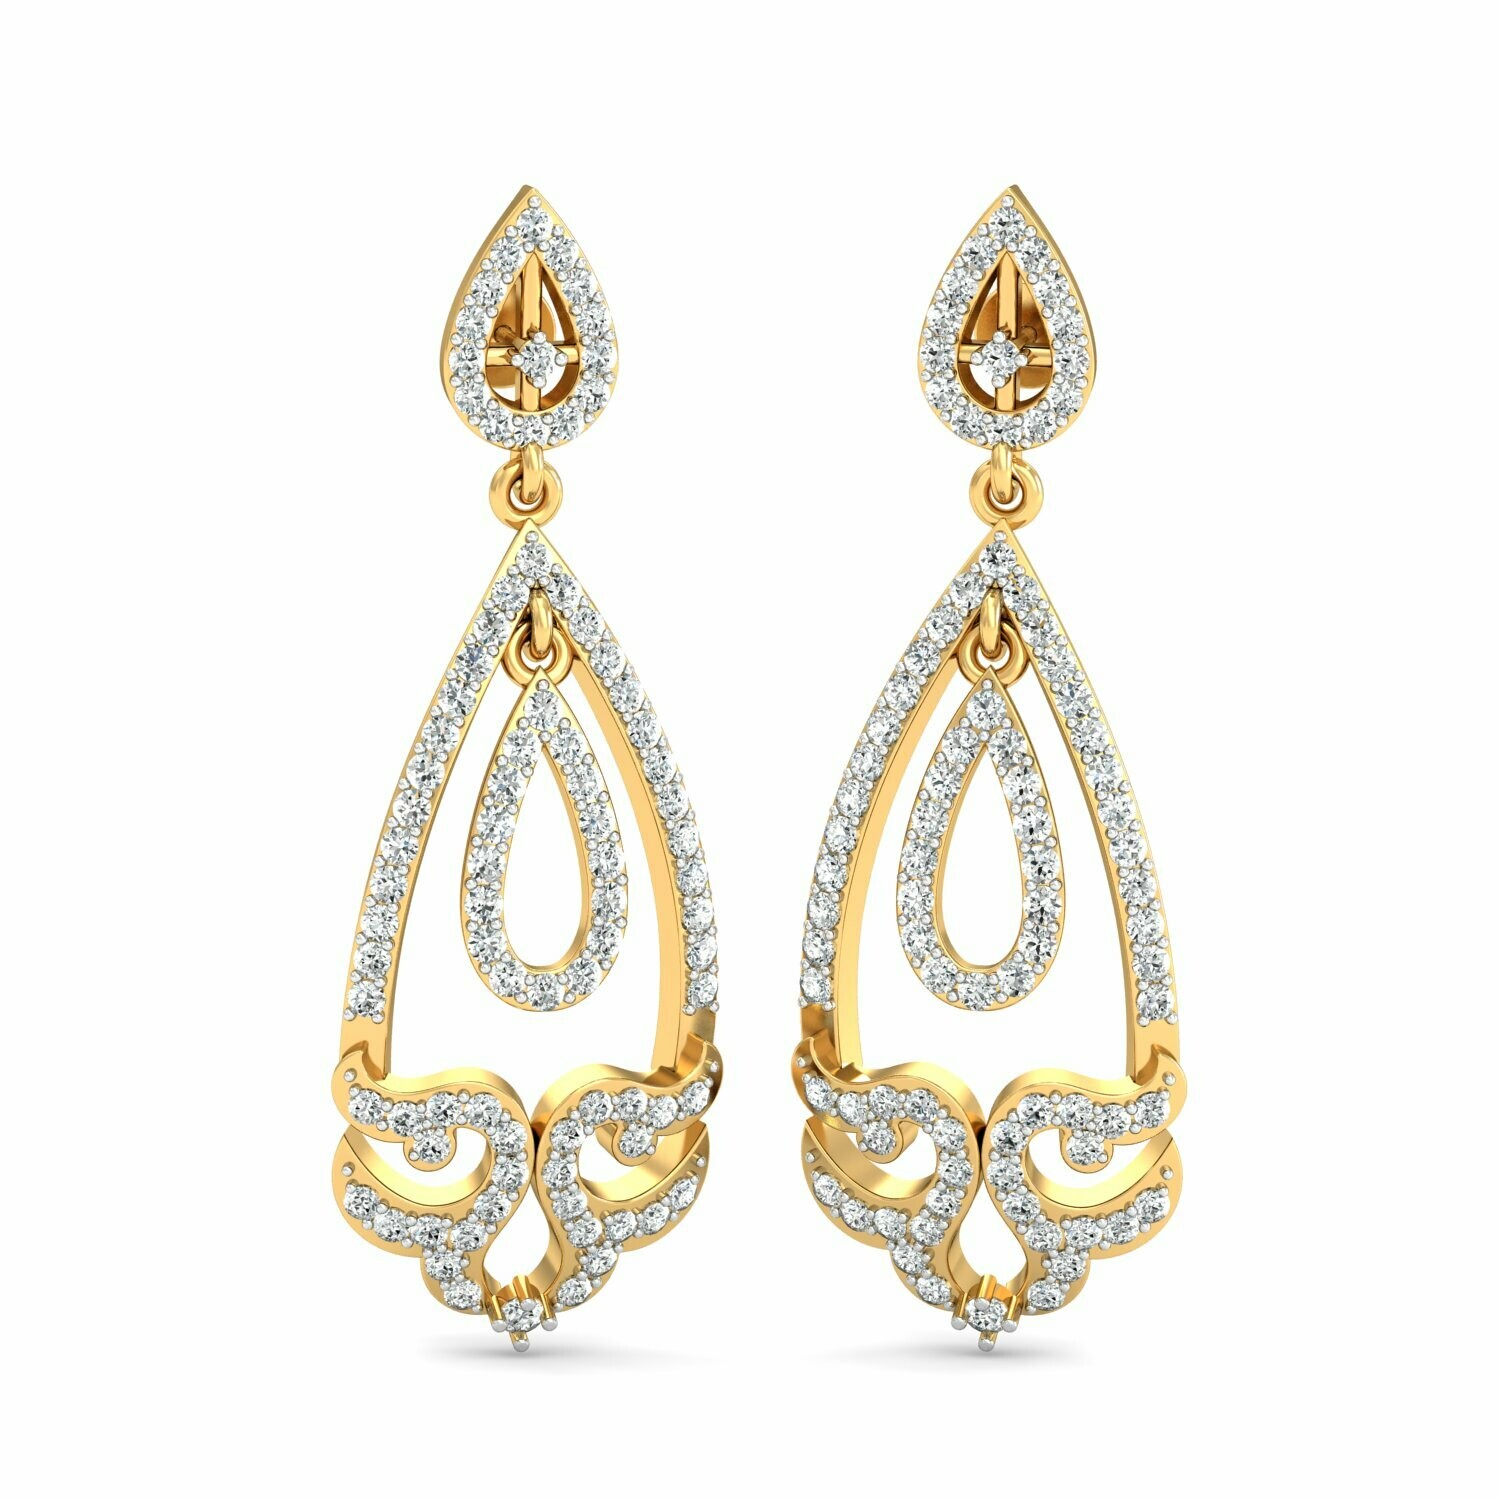 3D CAD jewelry model diamond earrings and pendant